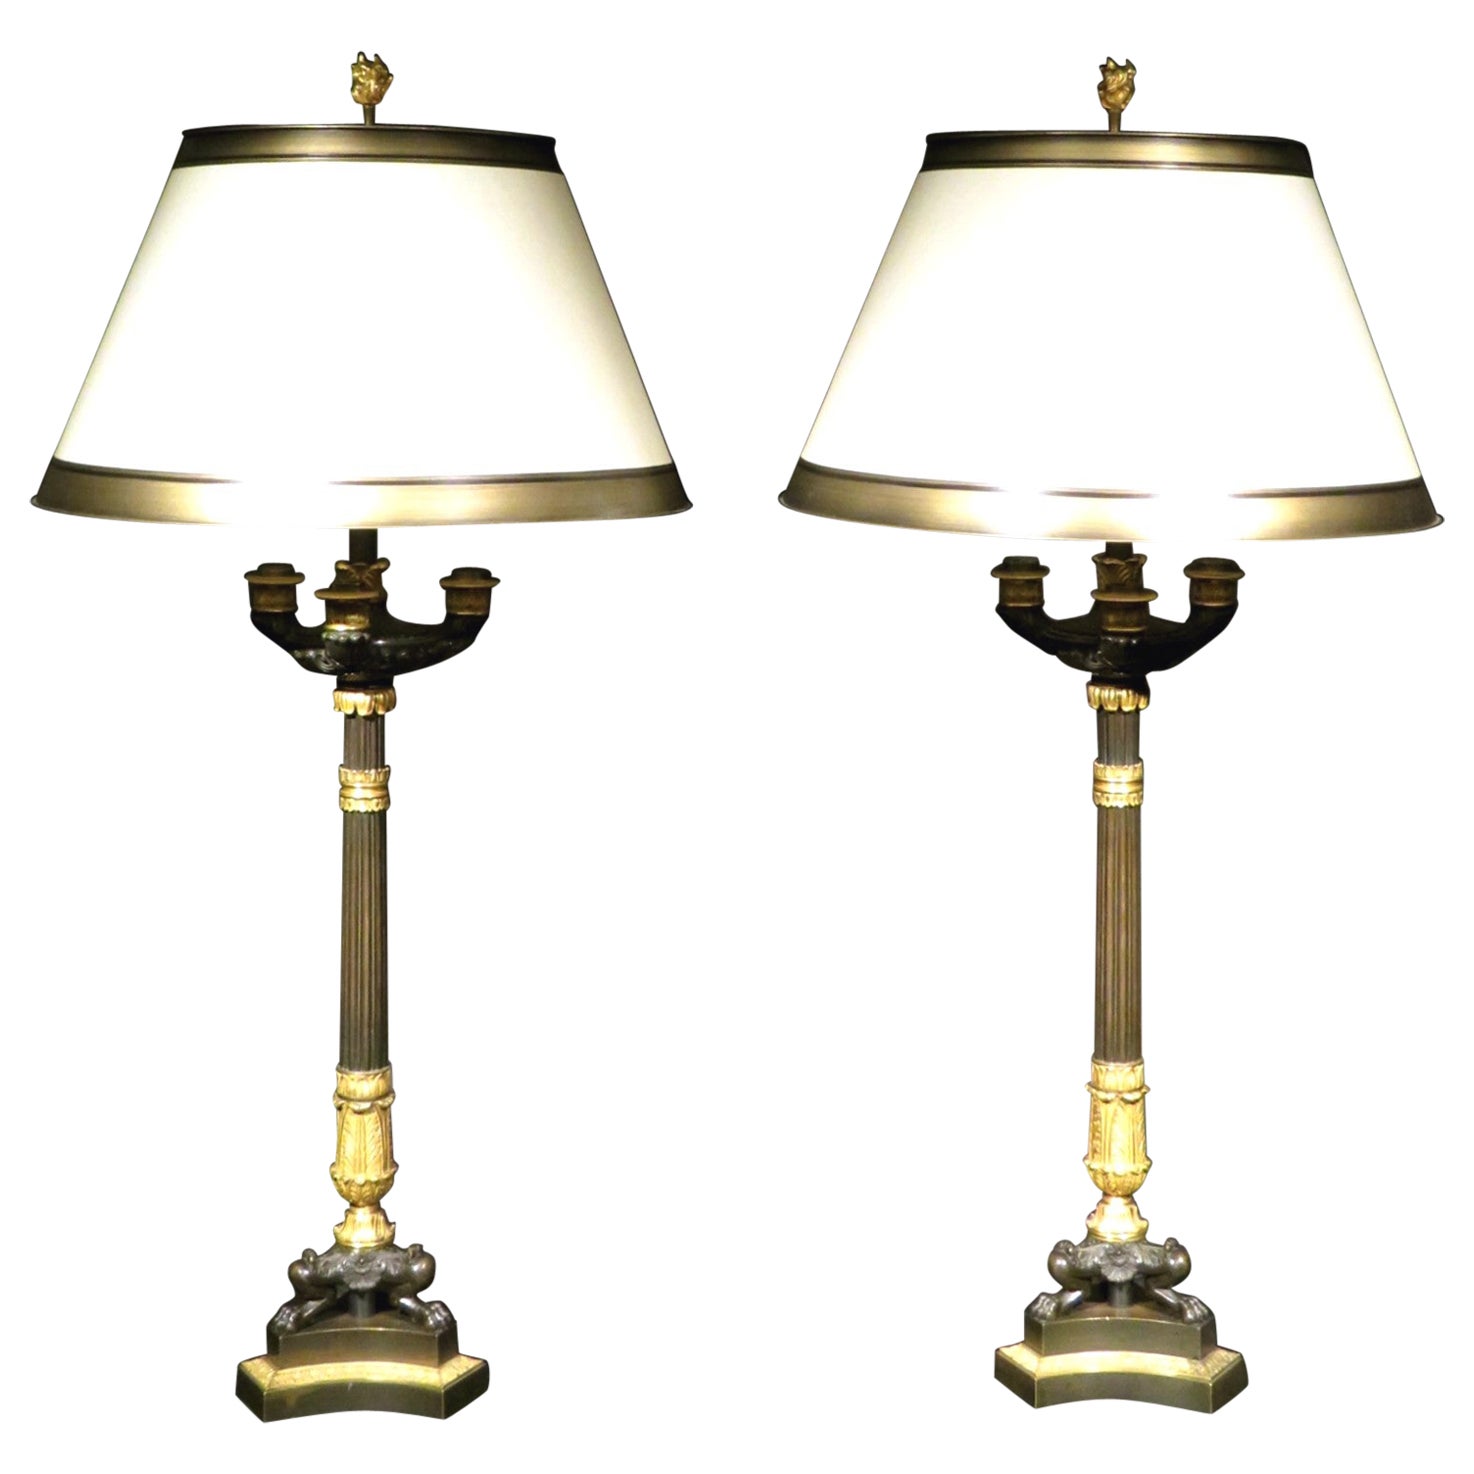 A Very Fine Pair of Empire Parcel Gilt Bronze Three Light Candelabra / Lamps For Sale